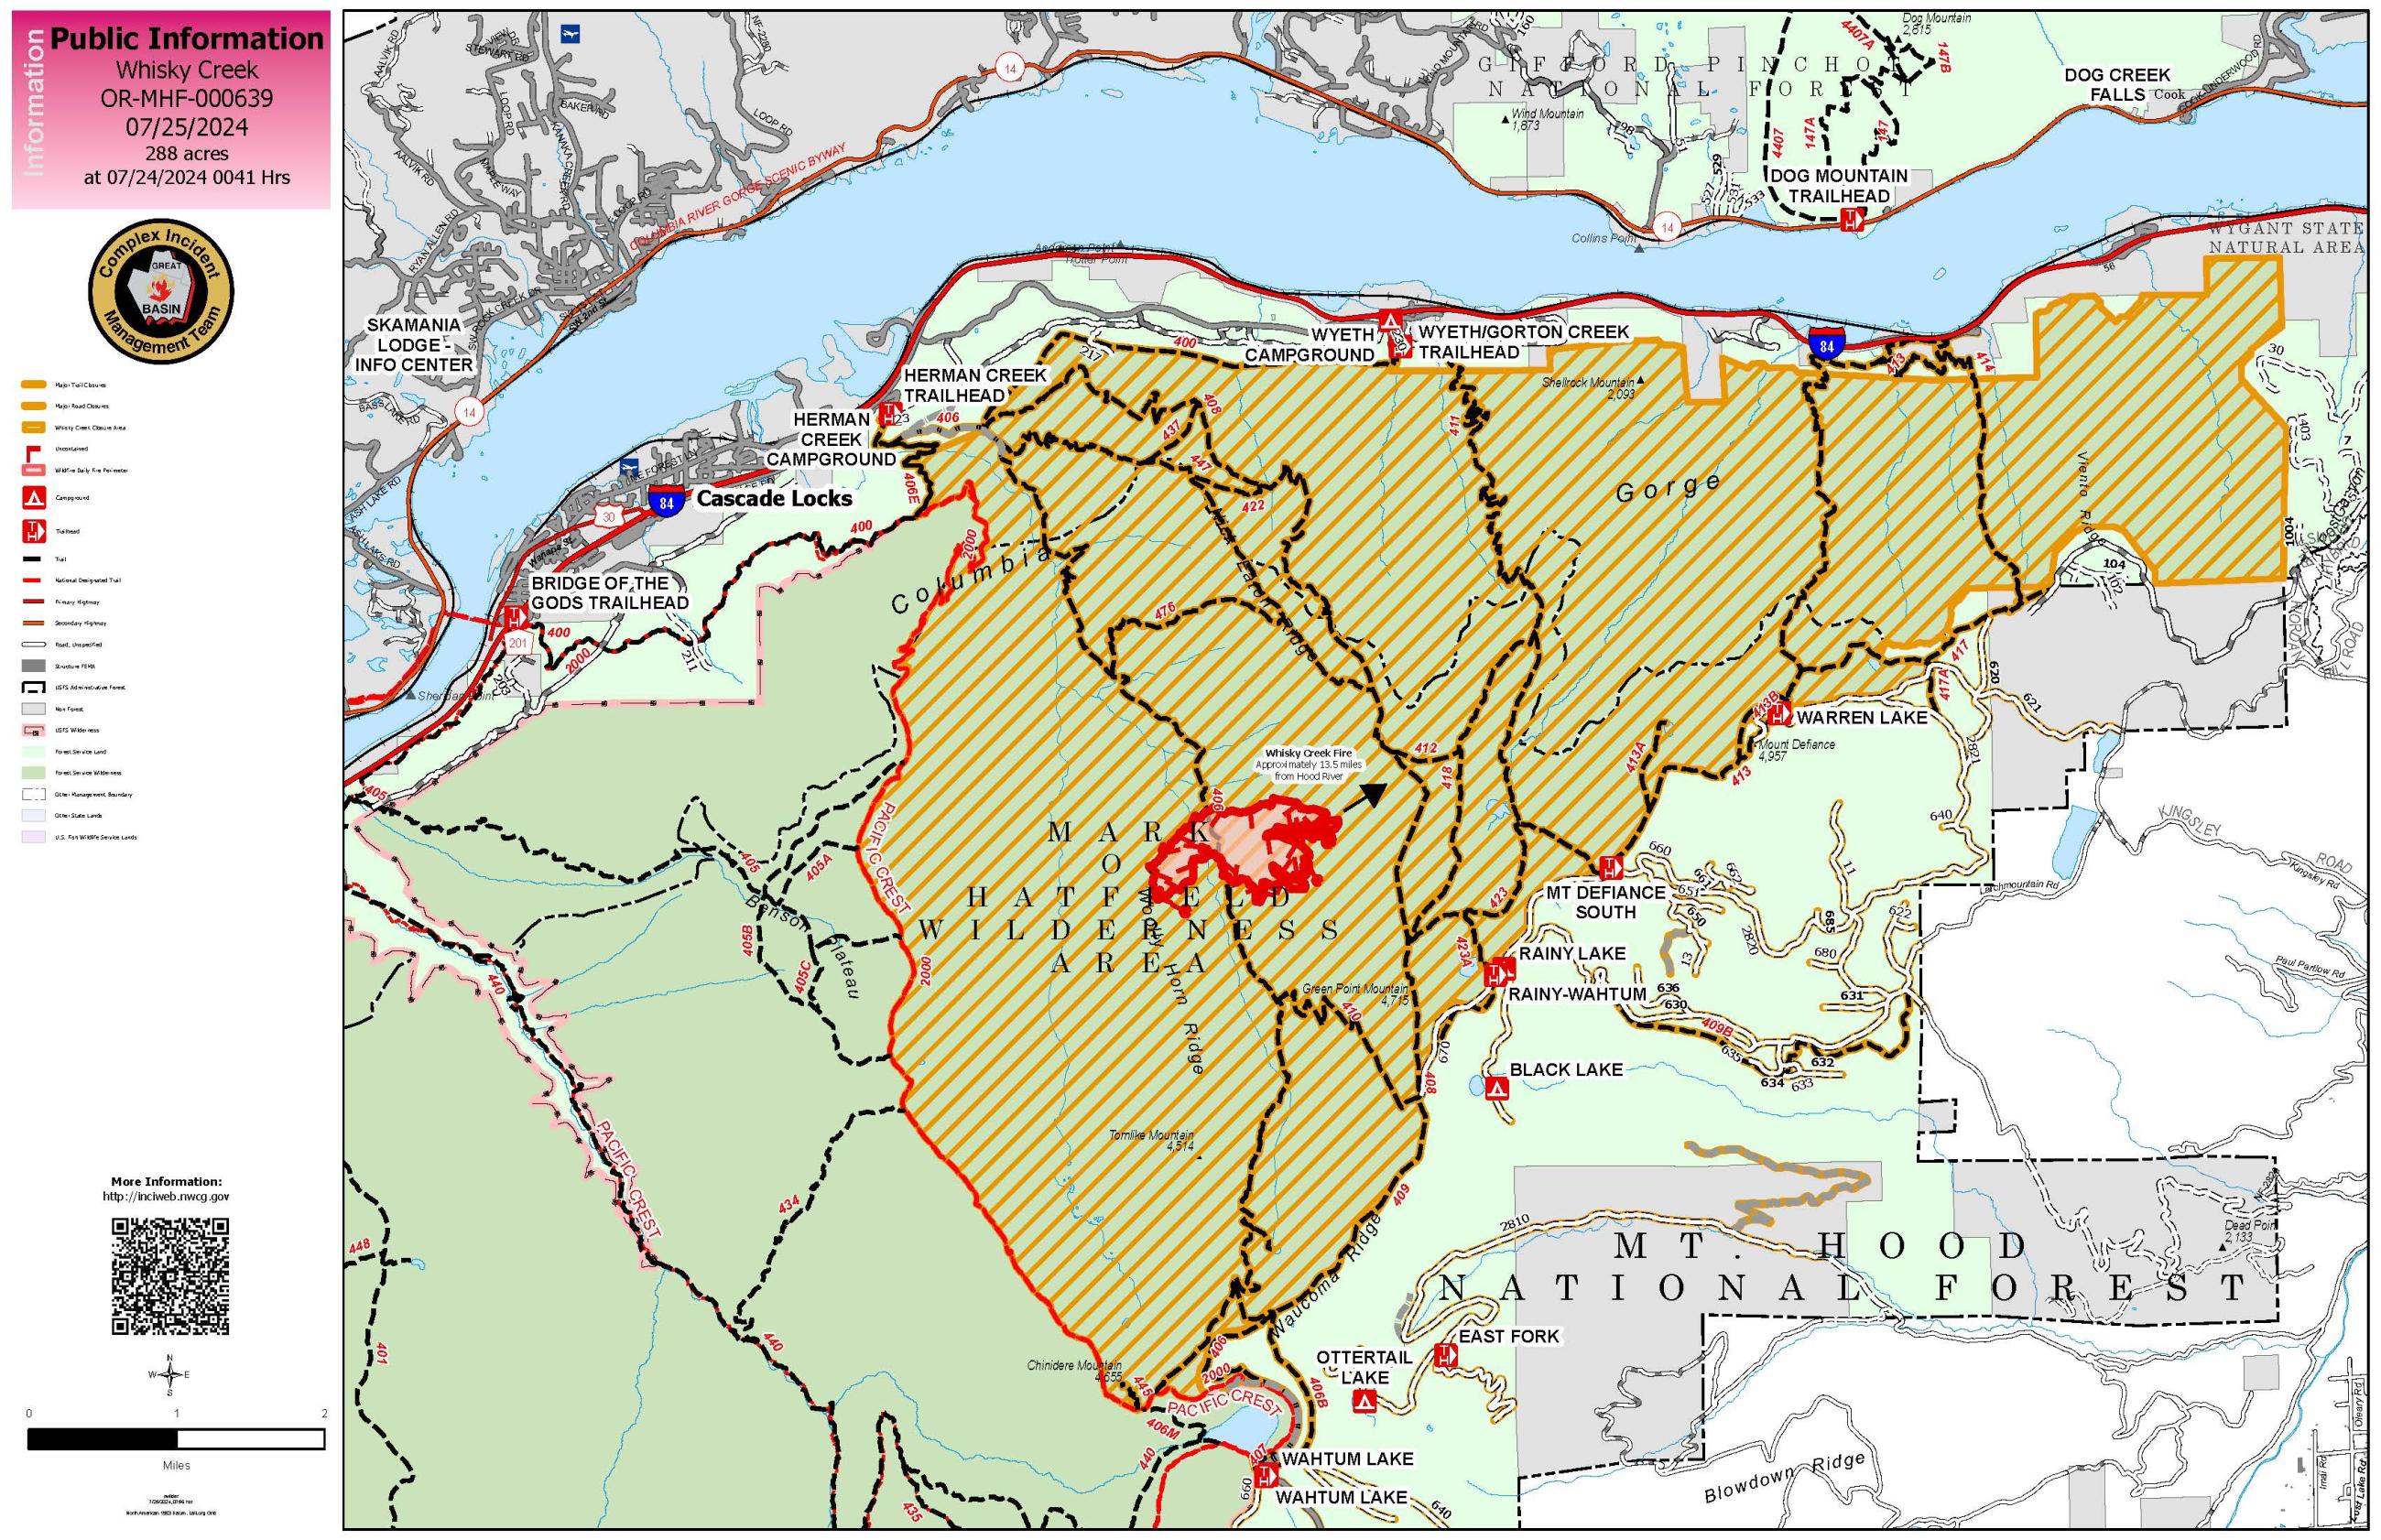 Map displaying the Whisky Creek Fire and closure area in relation to Cascade Locks, OR, and the Columbia River Gorge.